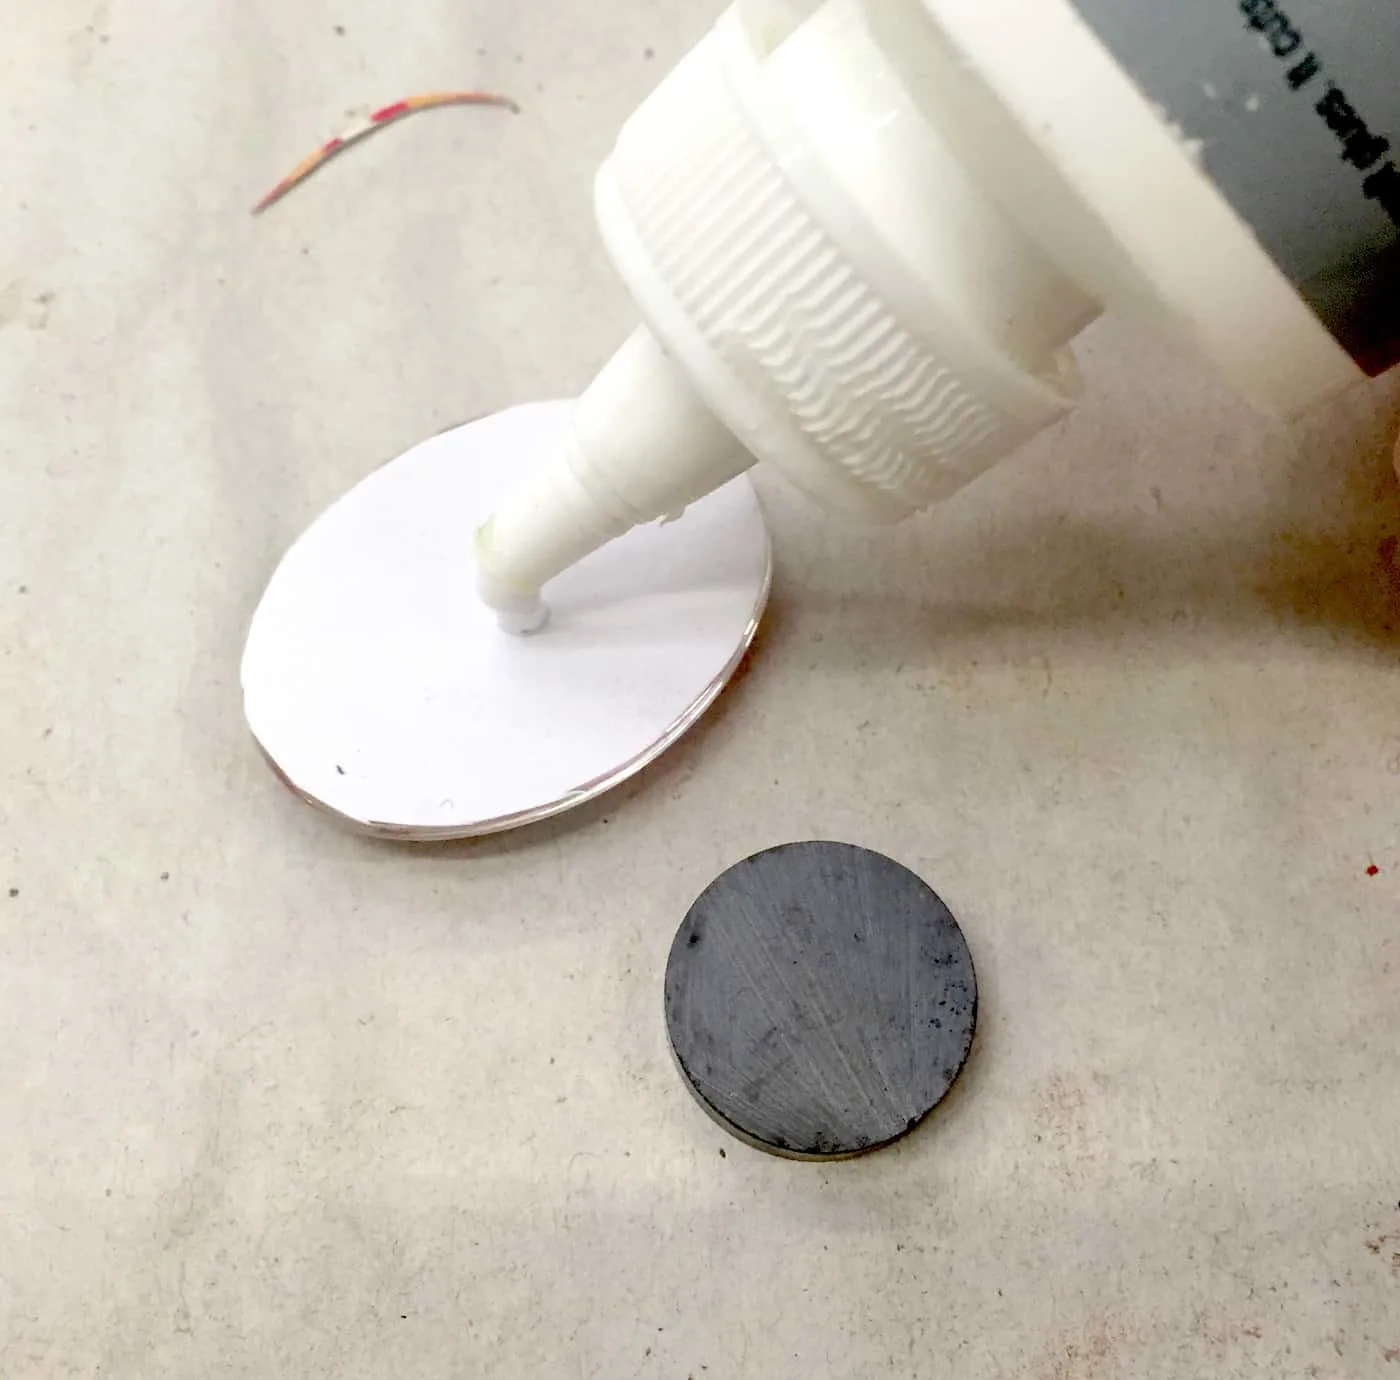 Magnet being glued to the back of a glass dome with craft glue